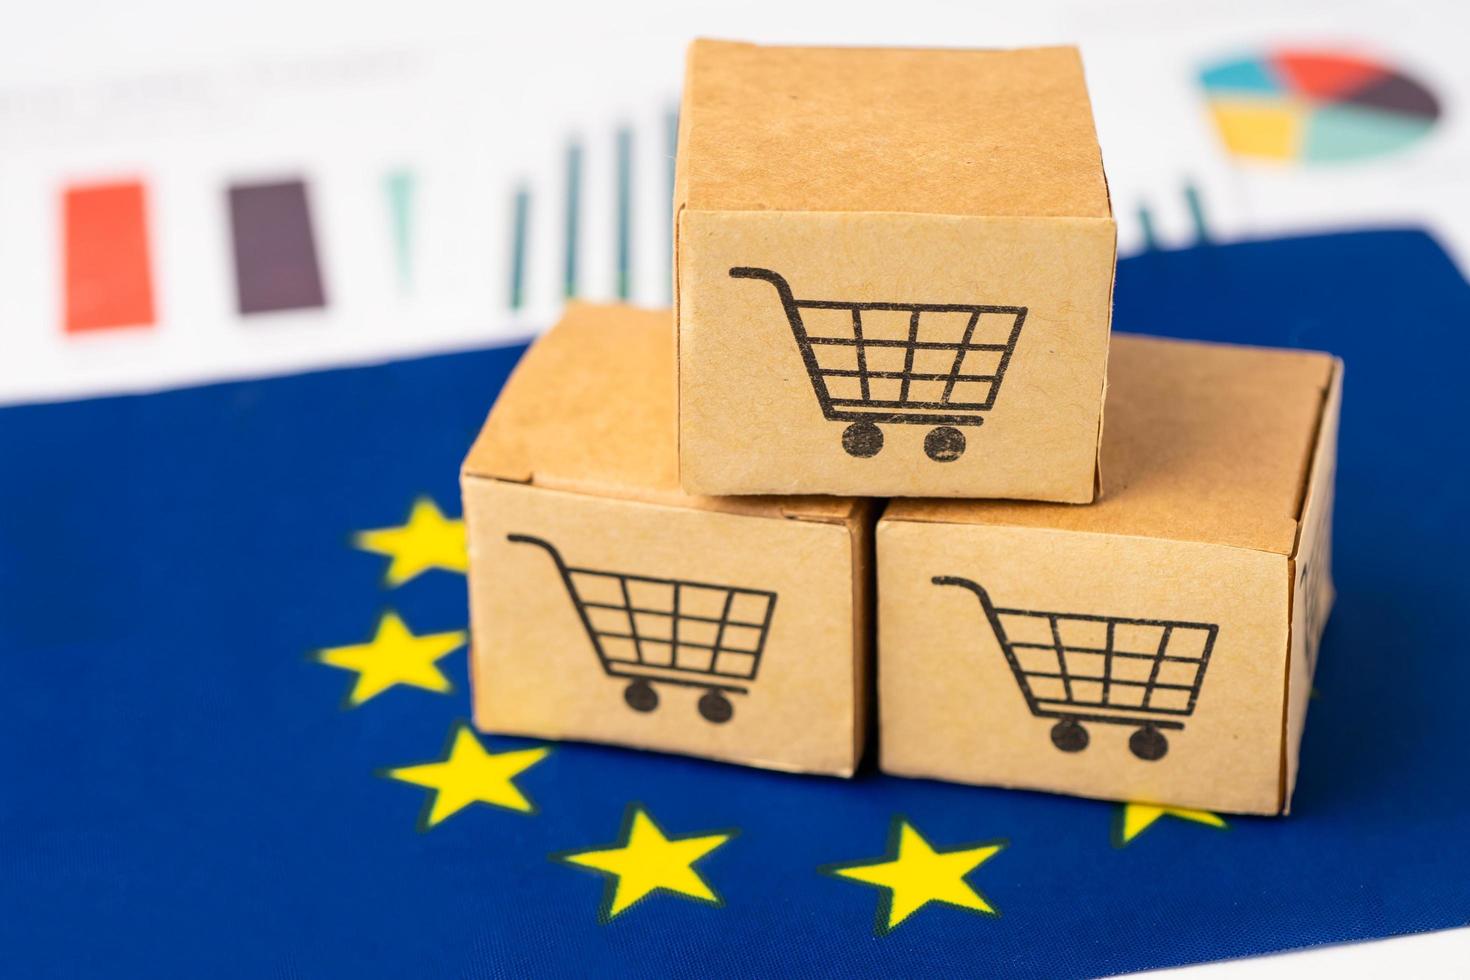 Box with shopping cart logo and EU flag, Import Export Shopping online or eCommerce finance delivery service store product shipping, trade, supplier concept. photo